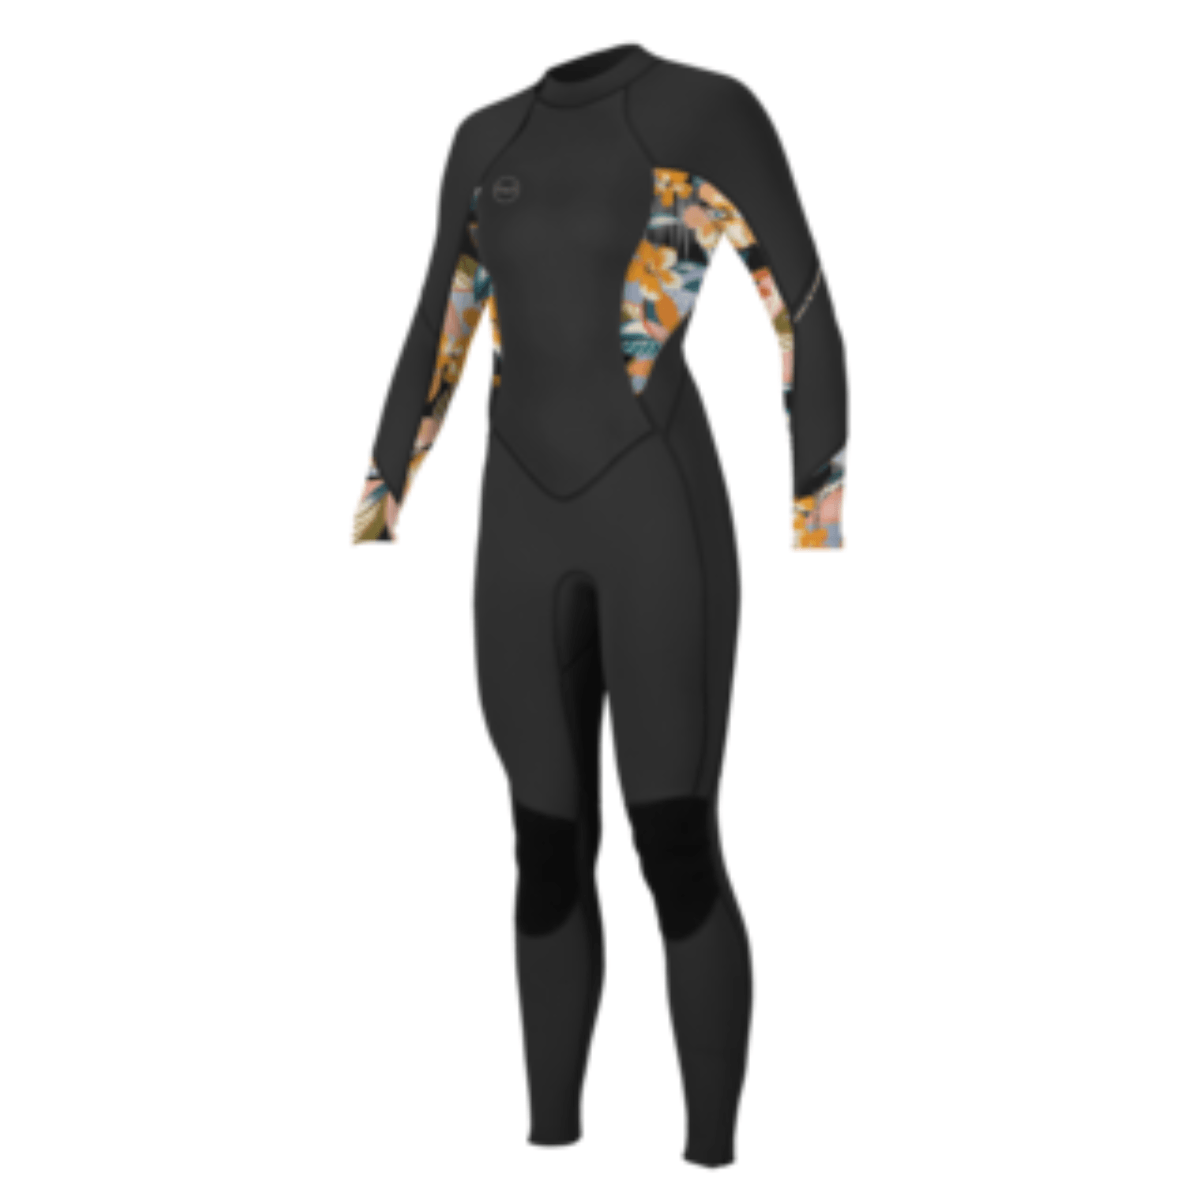 Oneill Women's Bahia 3/2mm Back Zip Full Wetsuit in Black and Demiflor - BoardCo